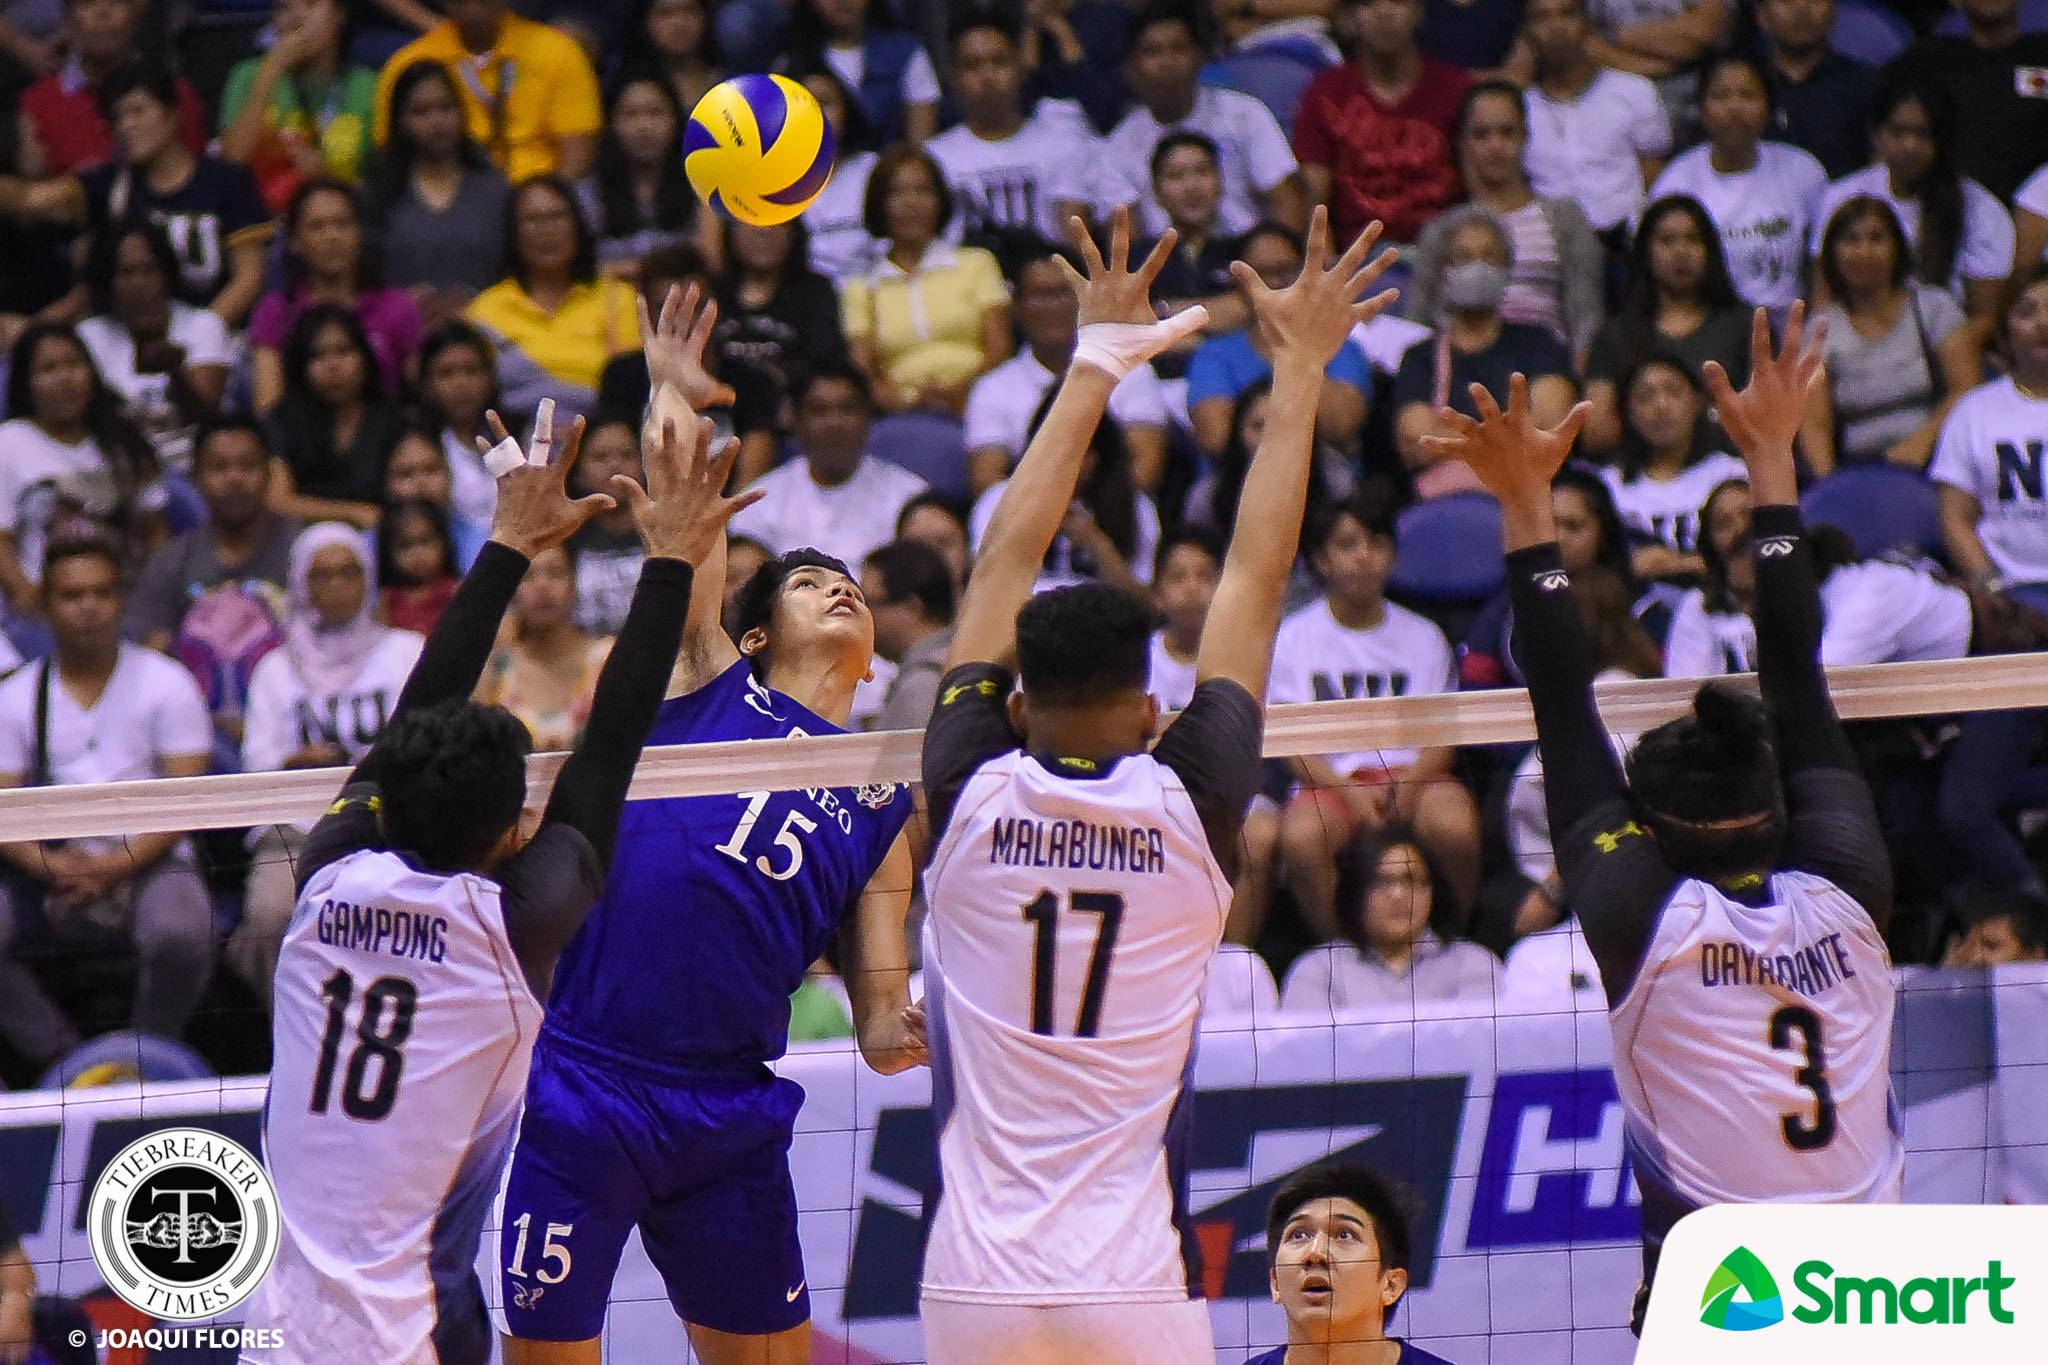 UAAP-80-Volleyball-NU-vs.-ADMU-Espejo-1599 After years of Finals dominance, Ateneo takes turn to adjust against Bulldogs ADMU News UAAP Volleyball  - philippine sports news